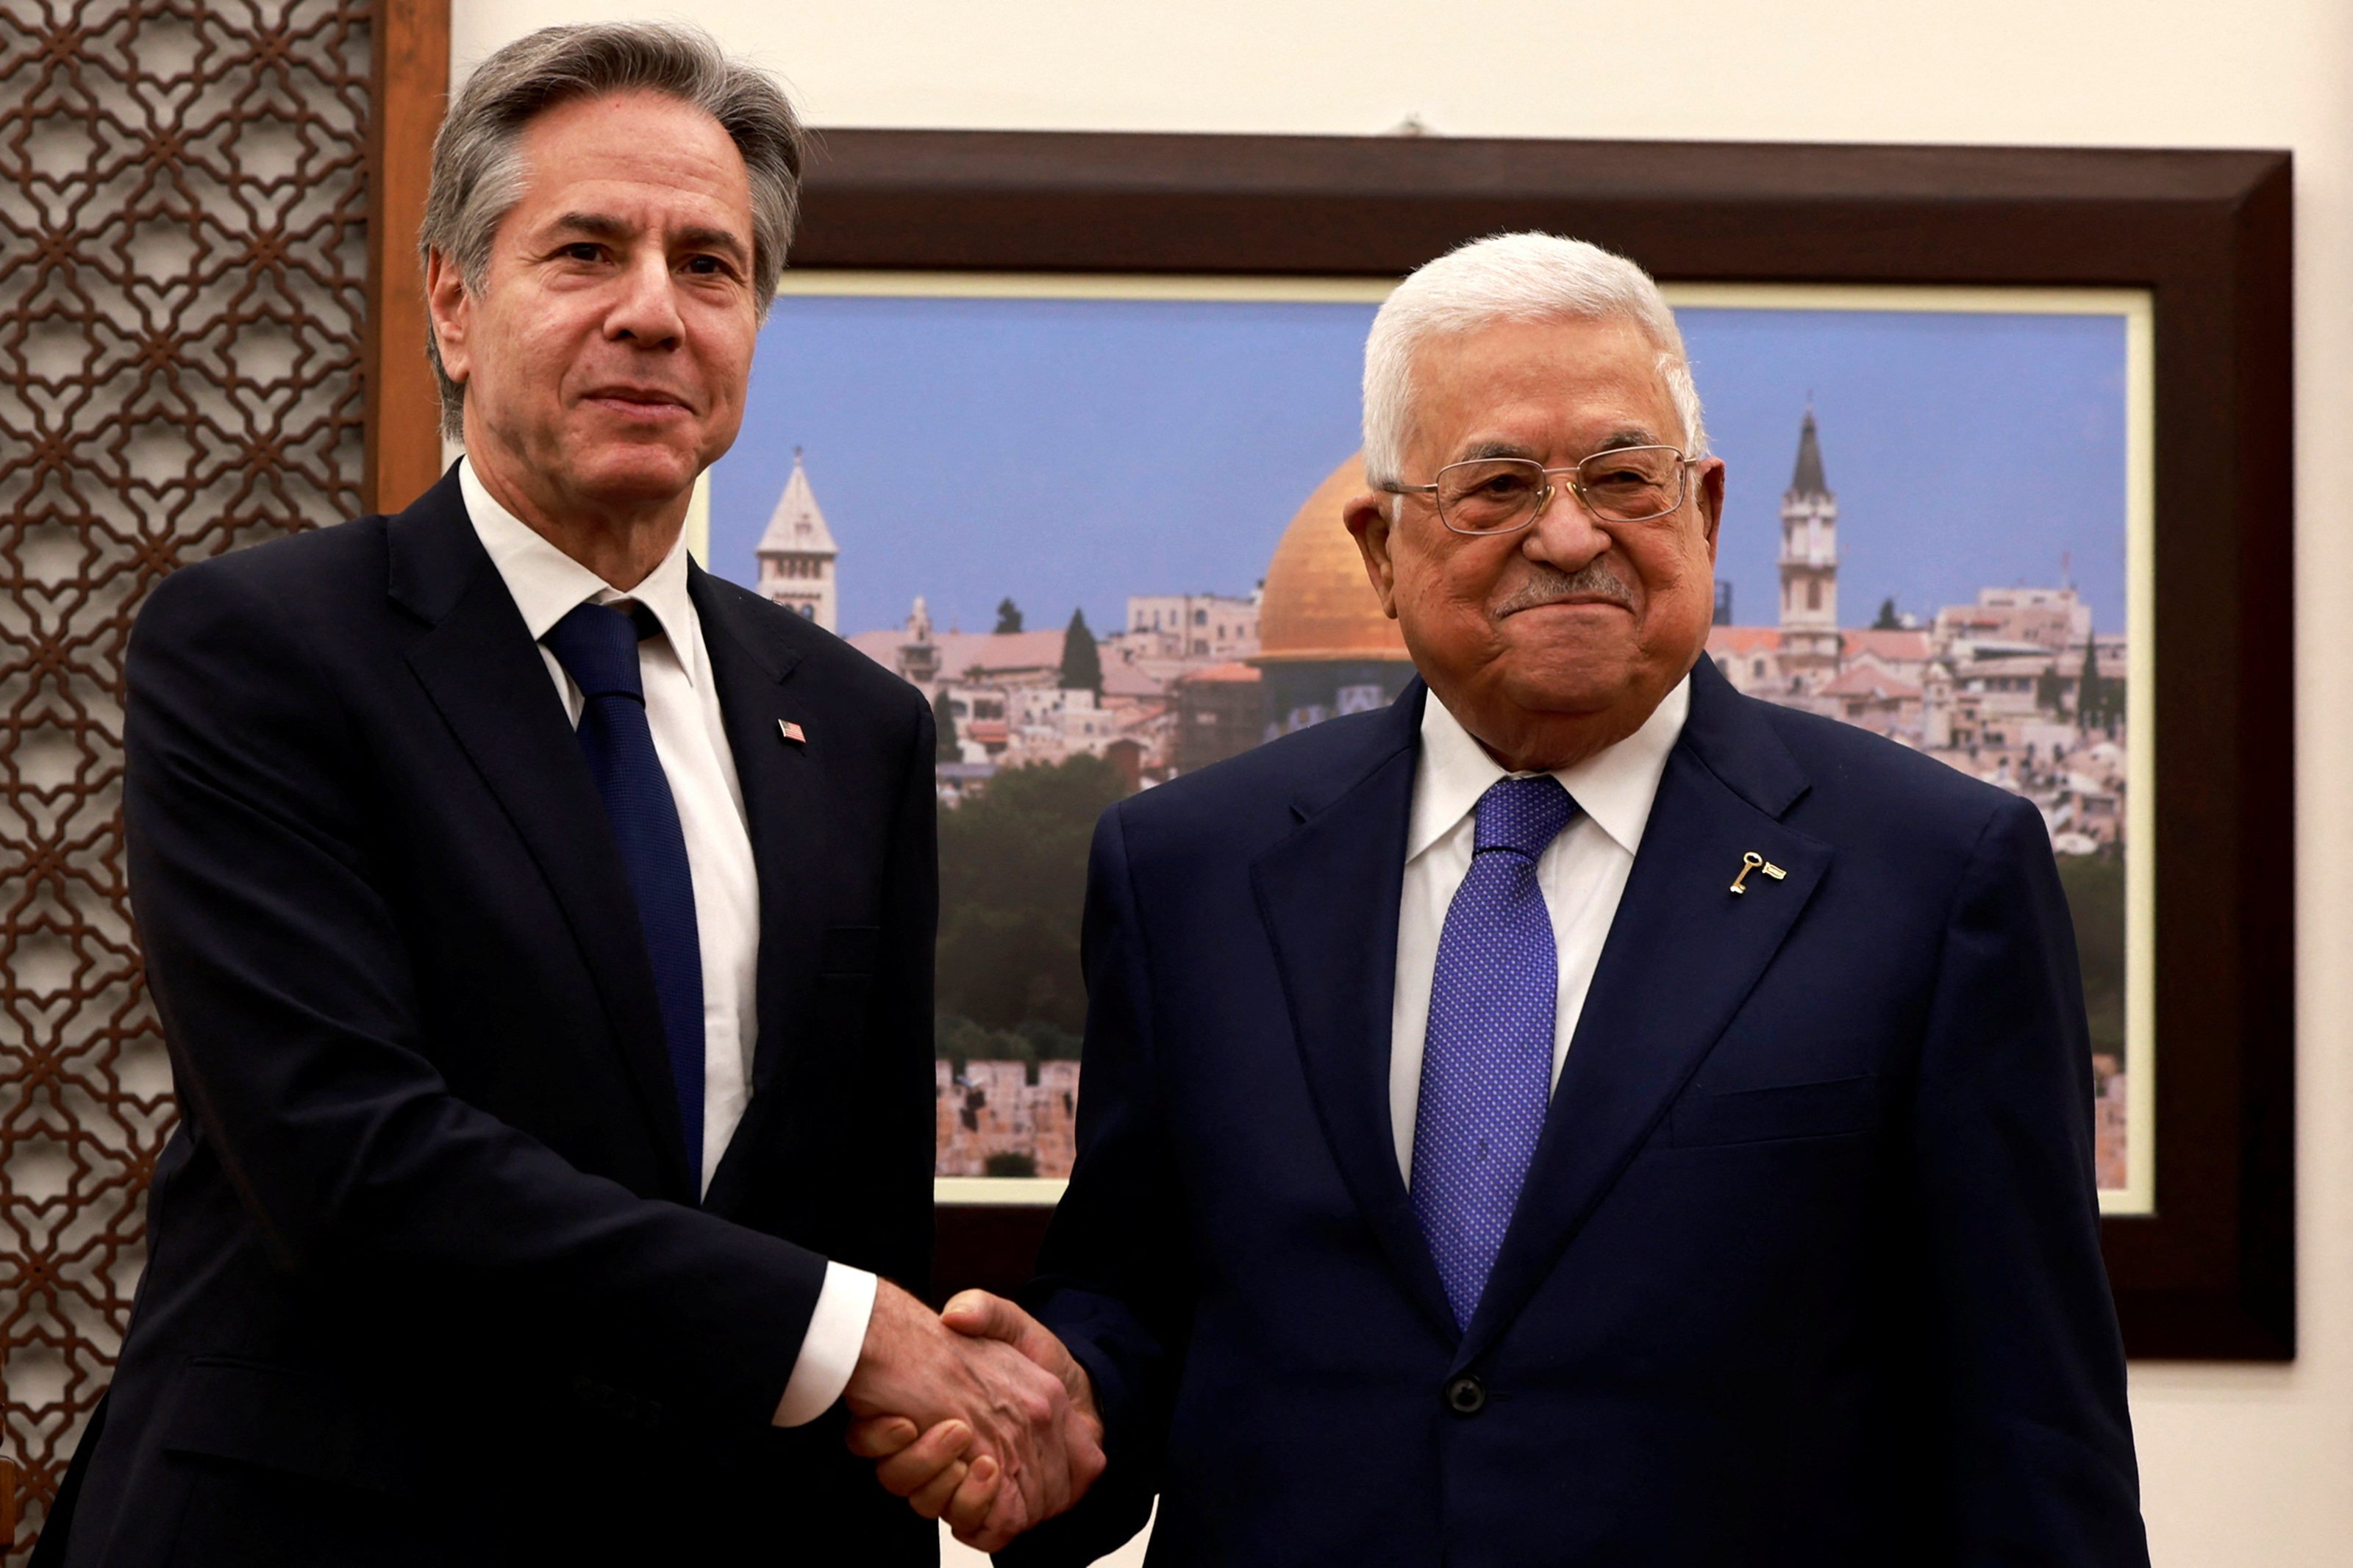 U.S. Secretary of State Antony Blinken meets with Palestinian President Mahmoud Abbas, during his week-long trip aimed at calming tensions across the Middle East. Photo: Pool via Reuters